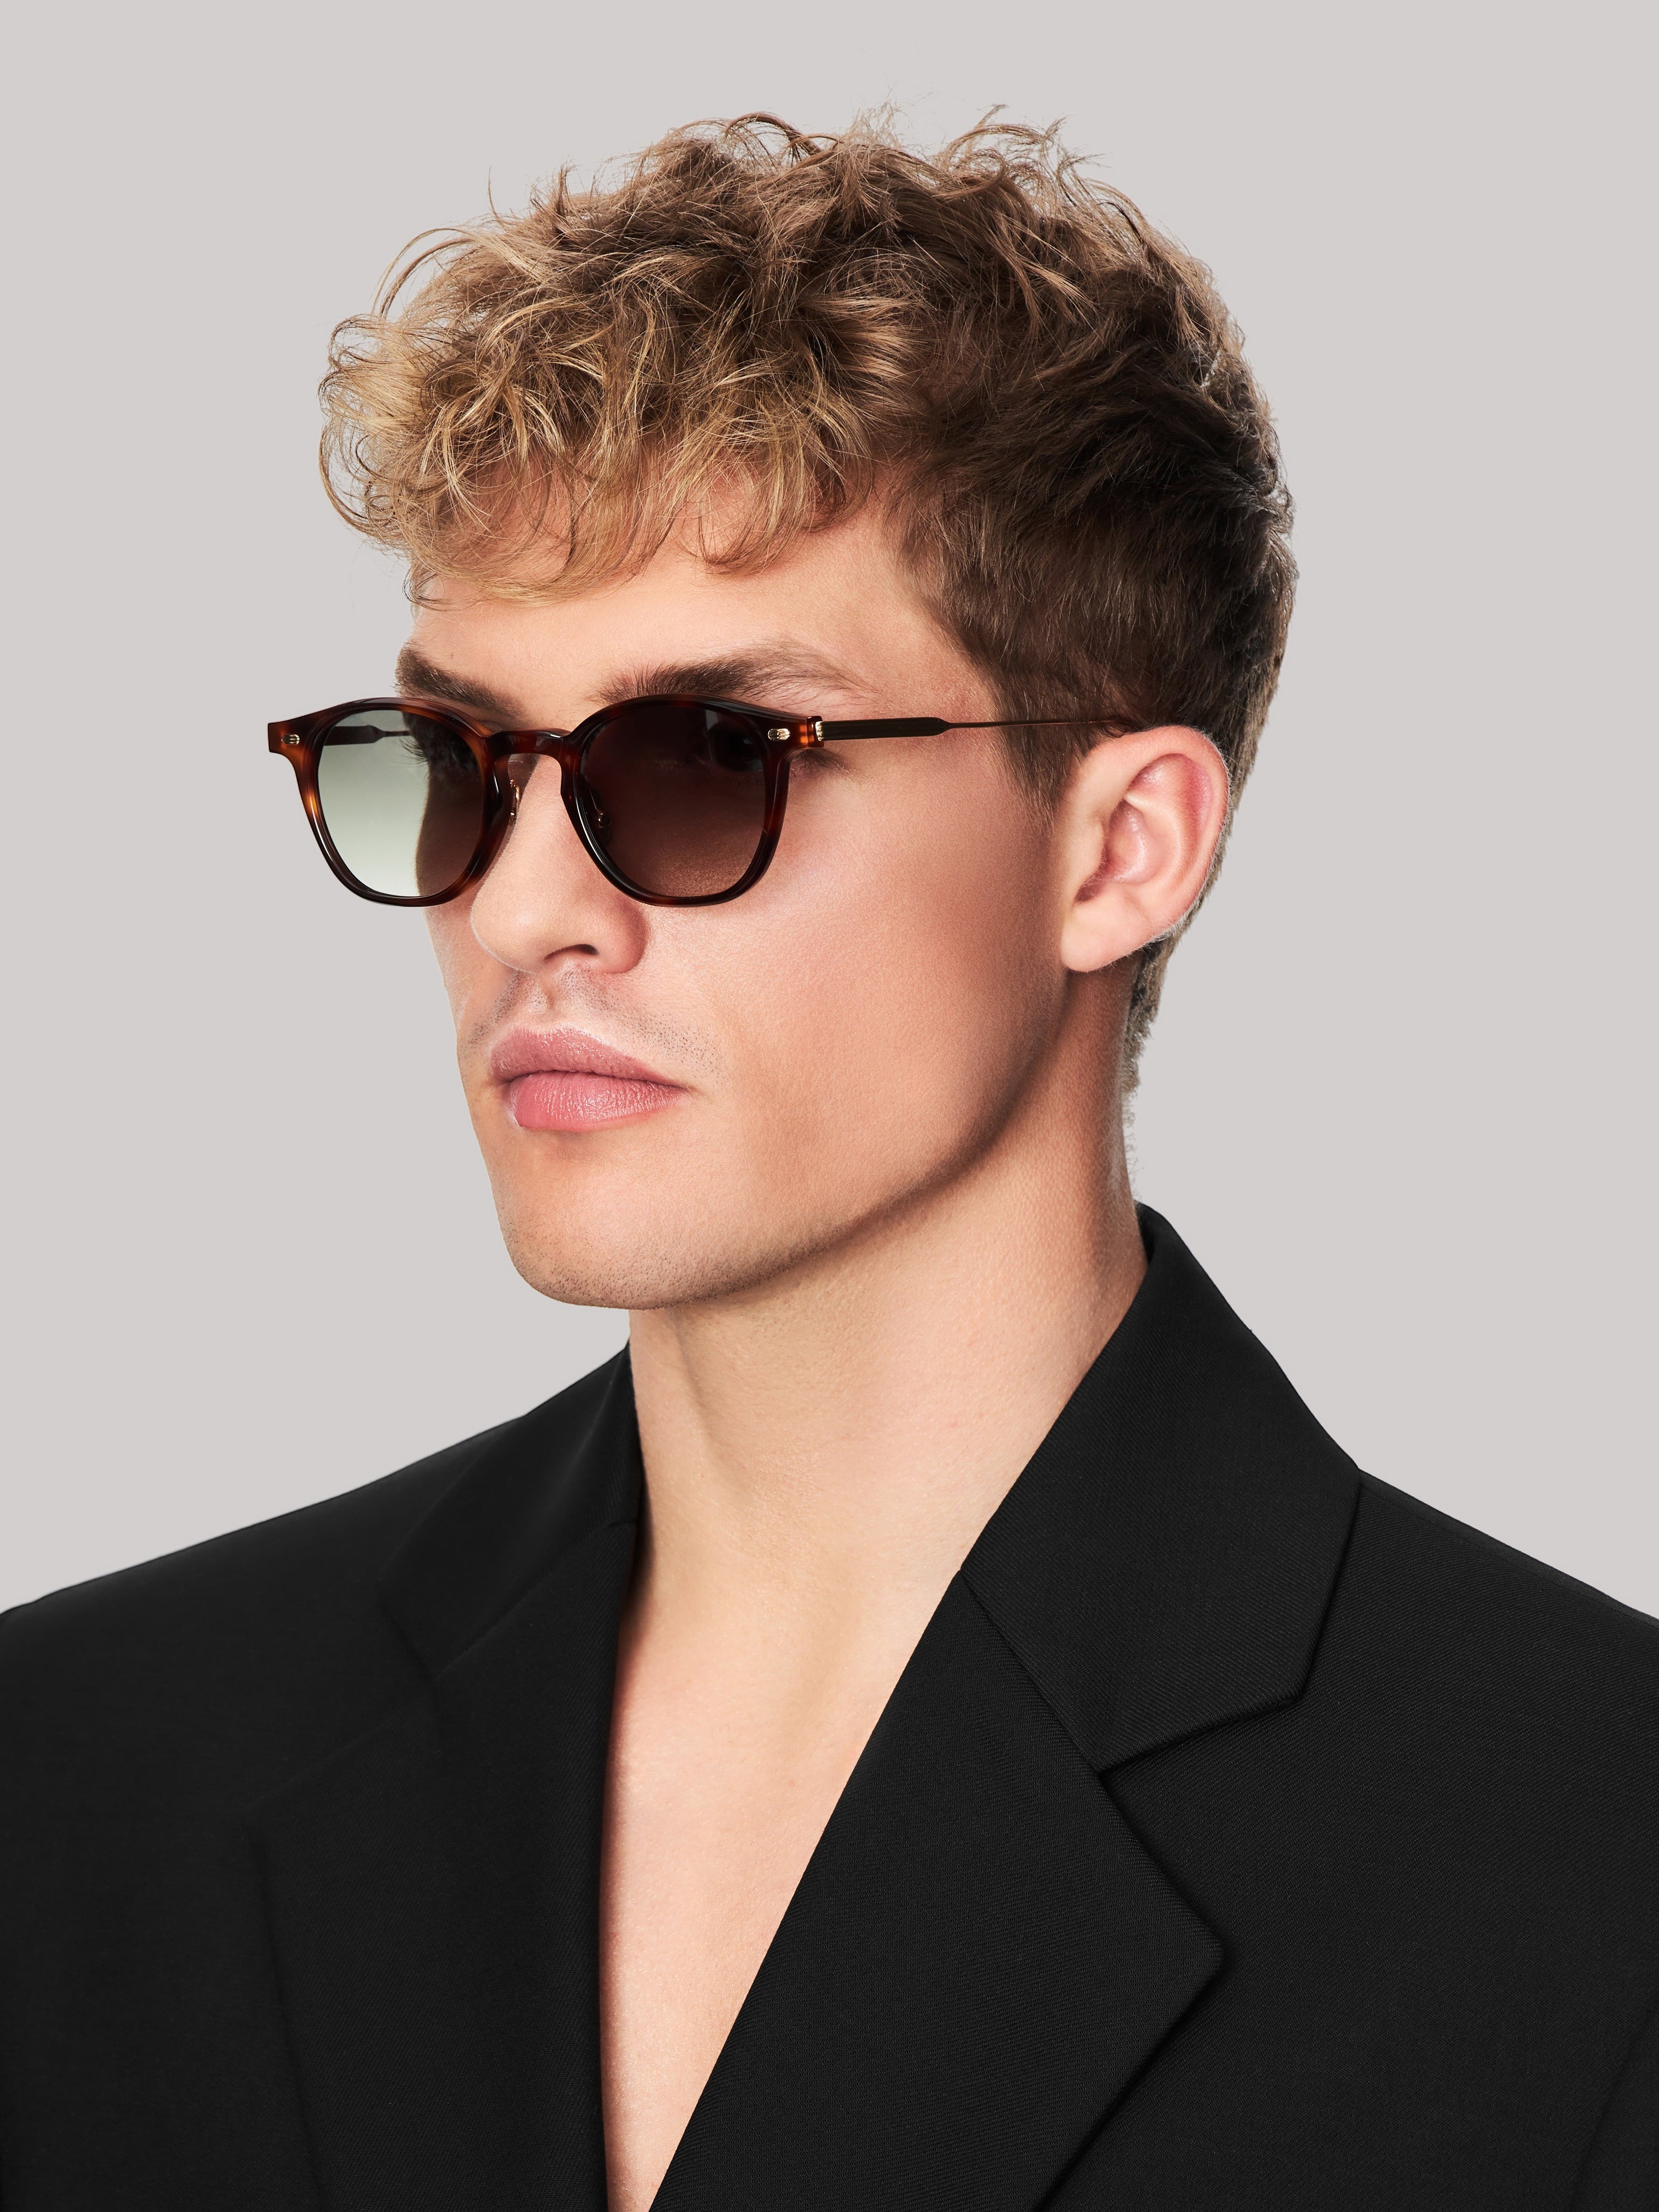 Explore Naruto Nagata online. Exclusive collections of Japanese eyewear for men. The latest Naruto Nagata fashionable sunglasses, limited collections and accessories. Shop Now. Shop Best Sellers. Naruto Nagata Eyewear.